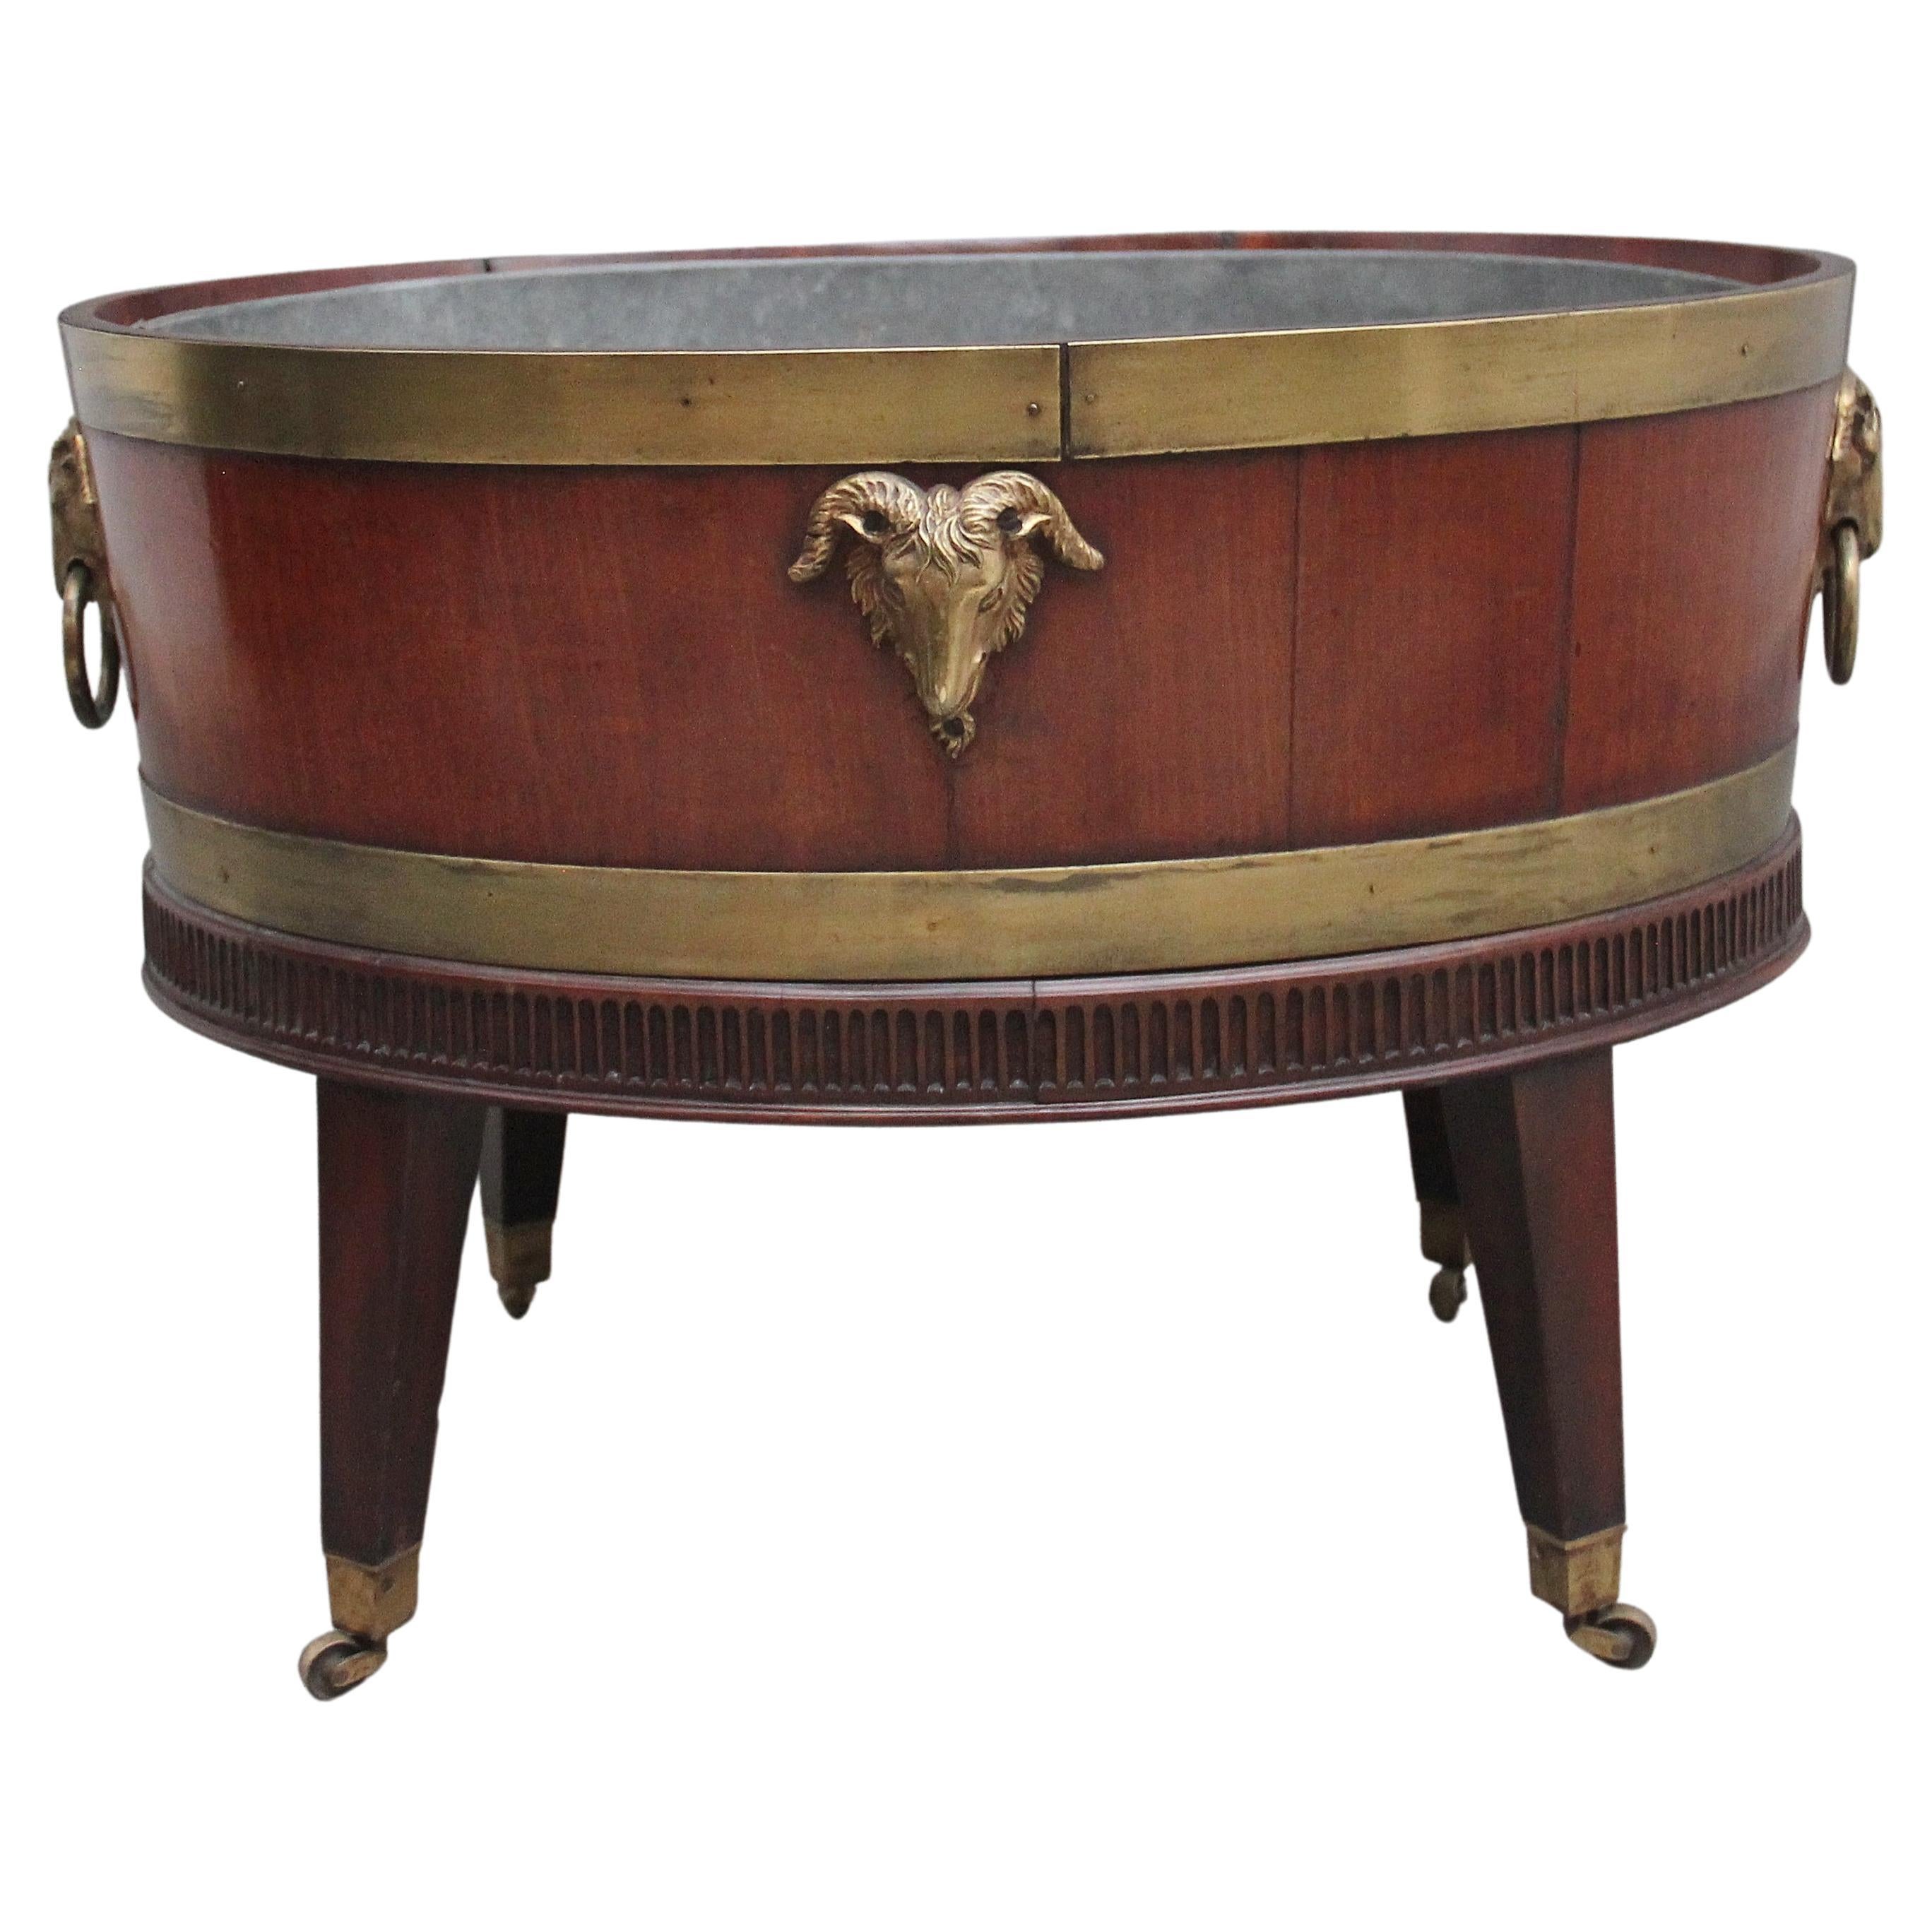 Highly Decorative Early 19th Century Mahogany and Brass Bound Wine Cooler For Sale